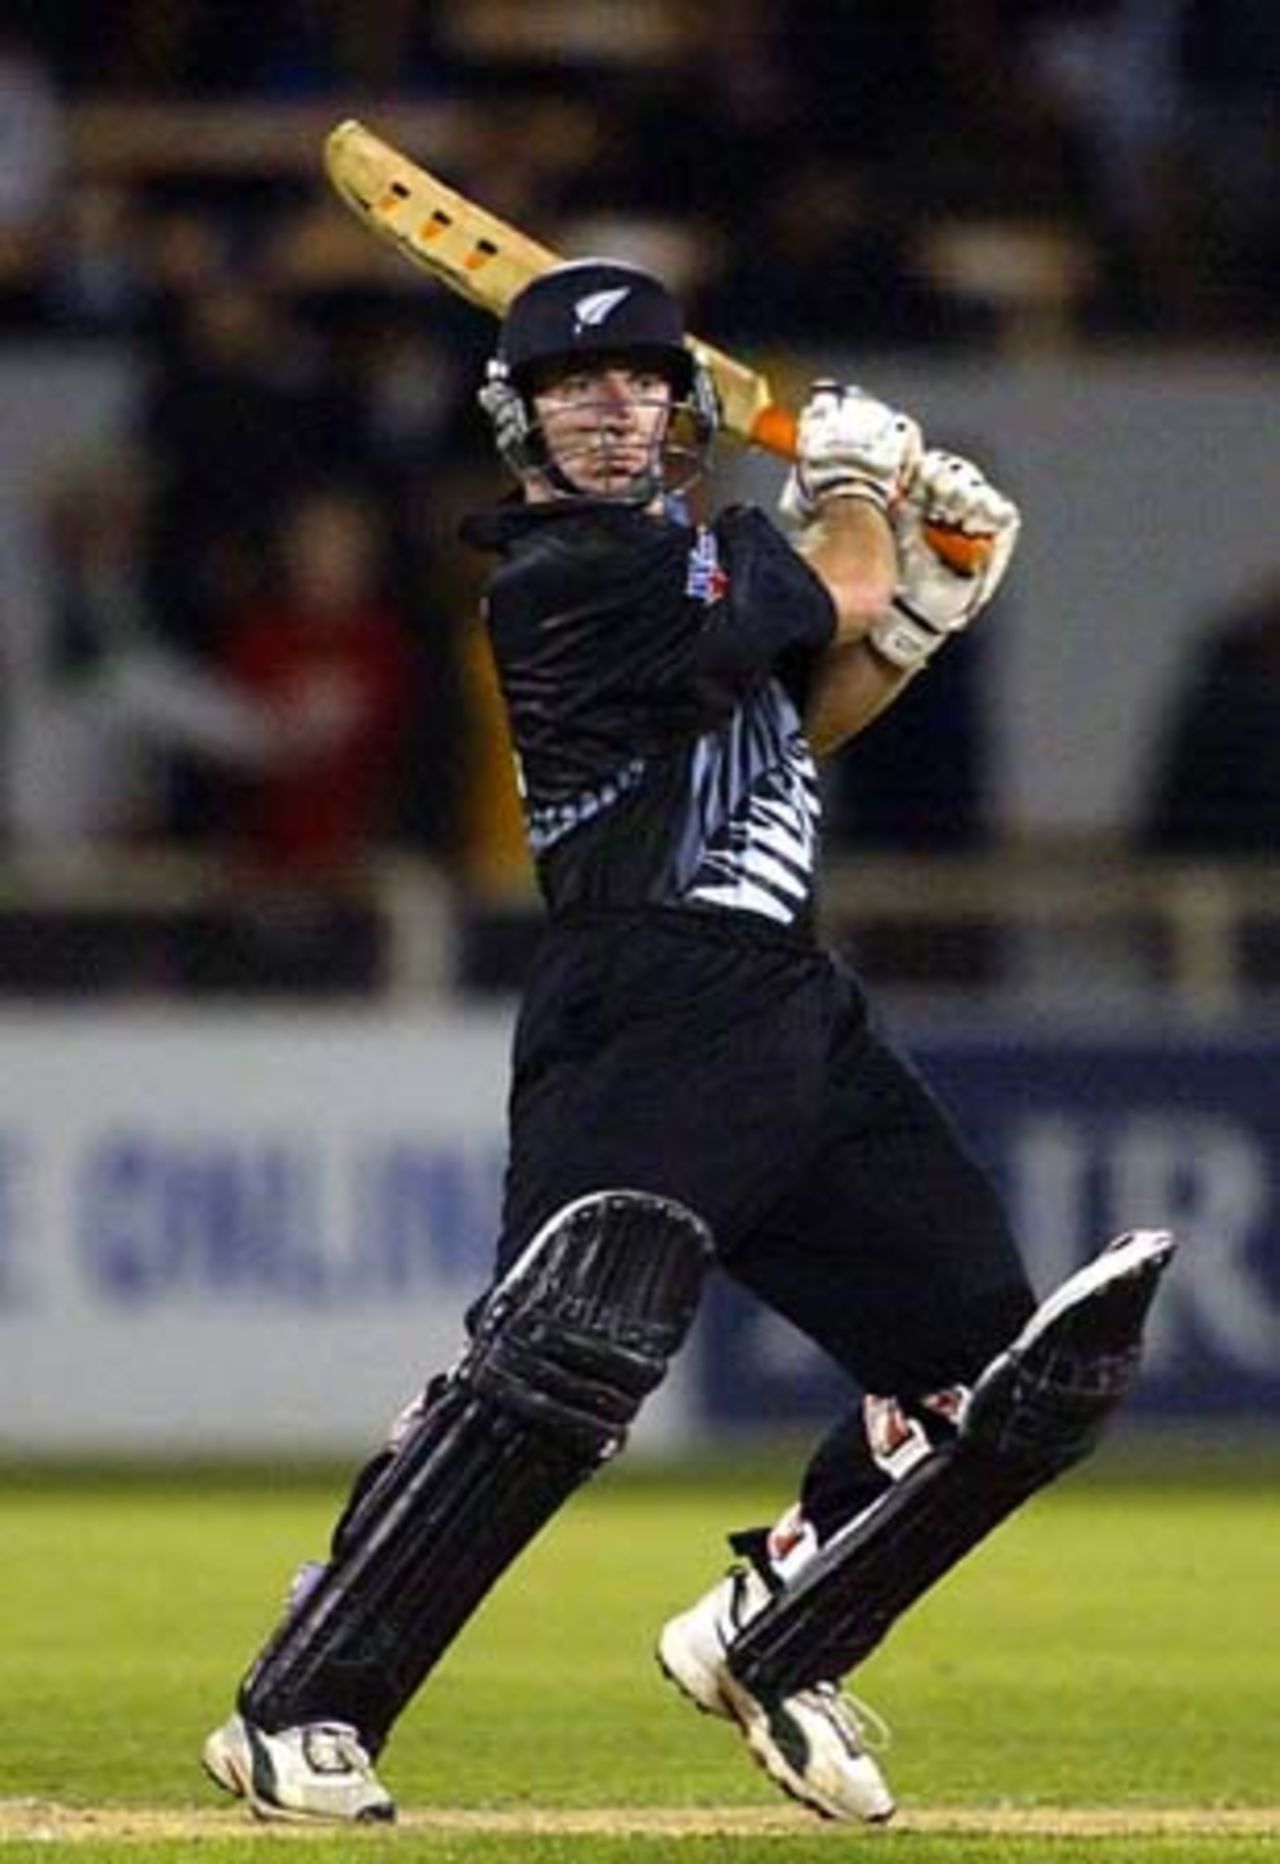 New Zealand batsman Chris Nevin plays a square cut during his innings of 55. 1st ODI: New Zealand v England at Jade Stadium, Christchurch, 13 February 2002.